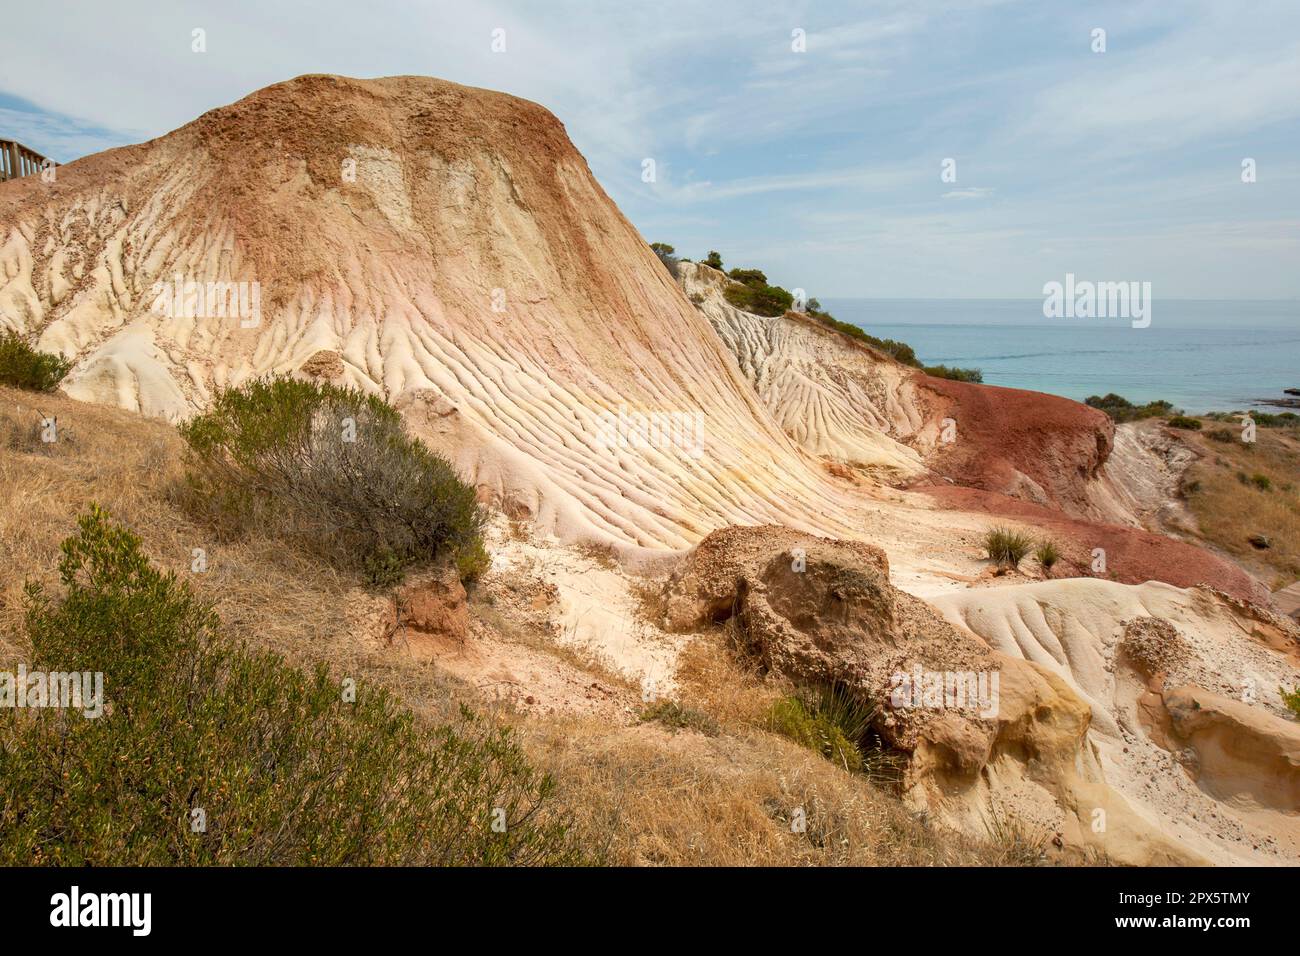 The Sugarloaf at the Hallett Cove Conservation Park in Adelaide, South Australia, Australia. The Sugarloaf is a cone-shaped hill made of sediments. Stock Photo